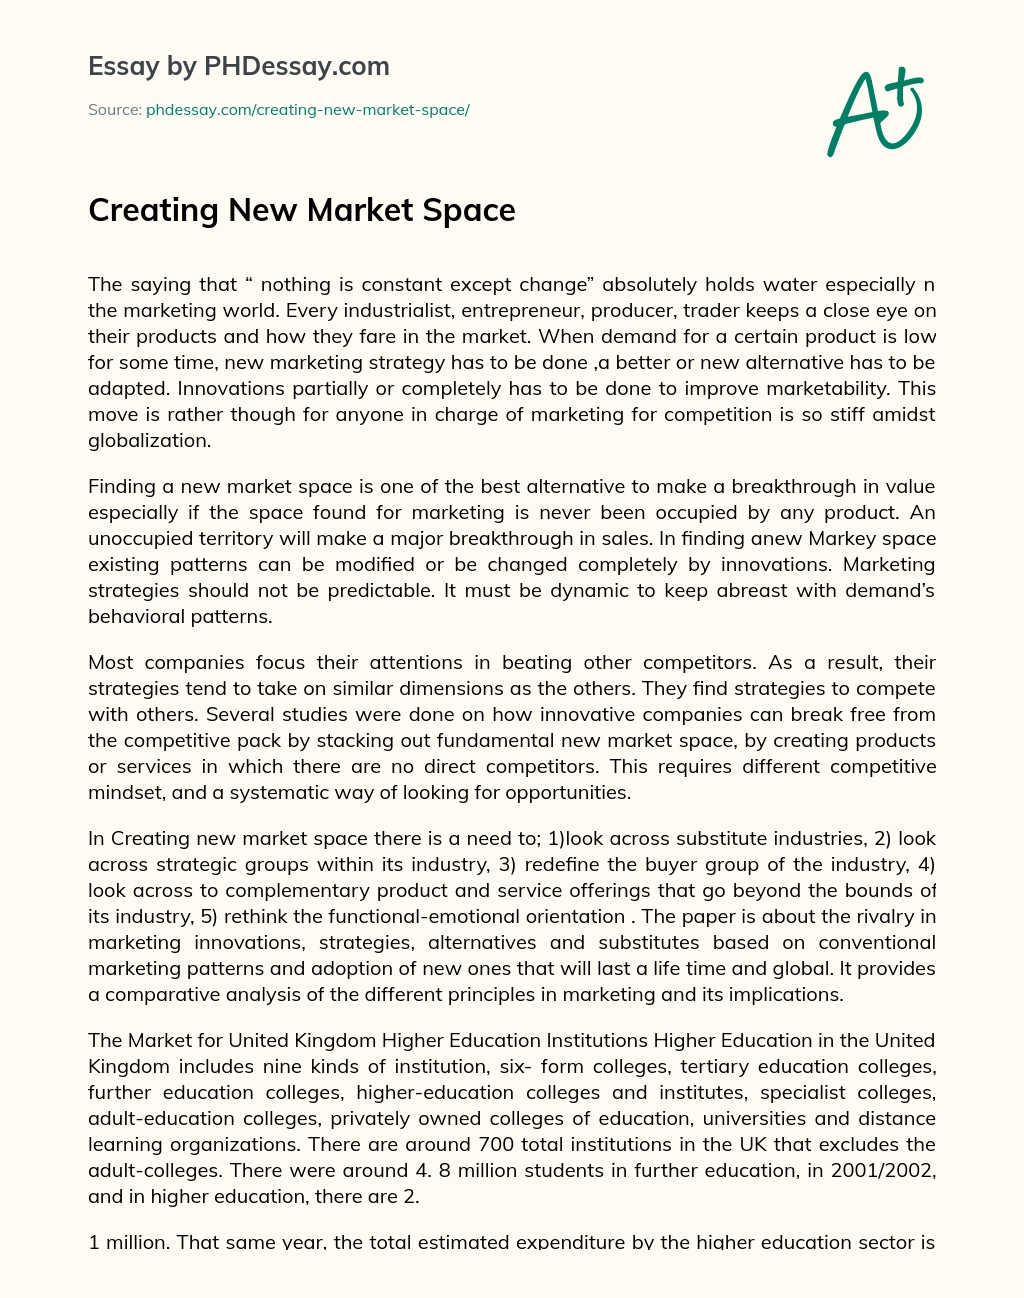 Creating  New Market Space essay